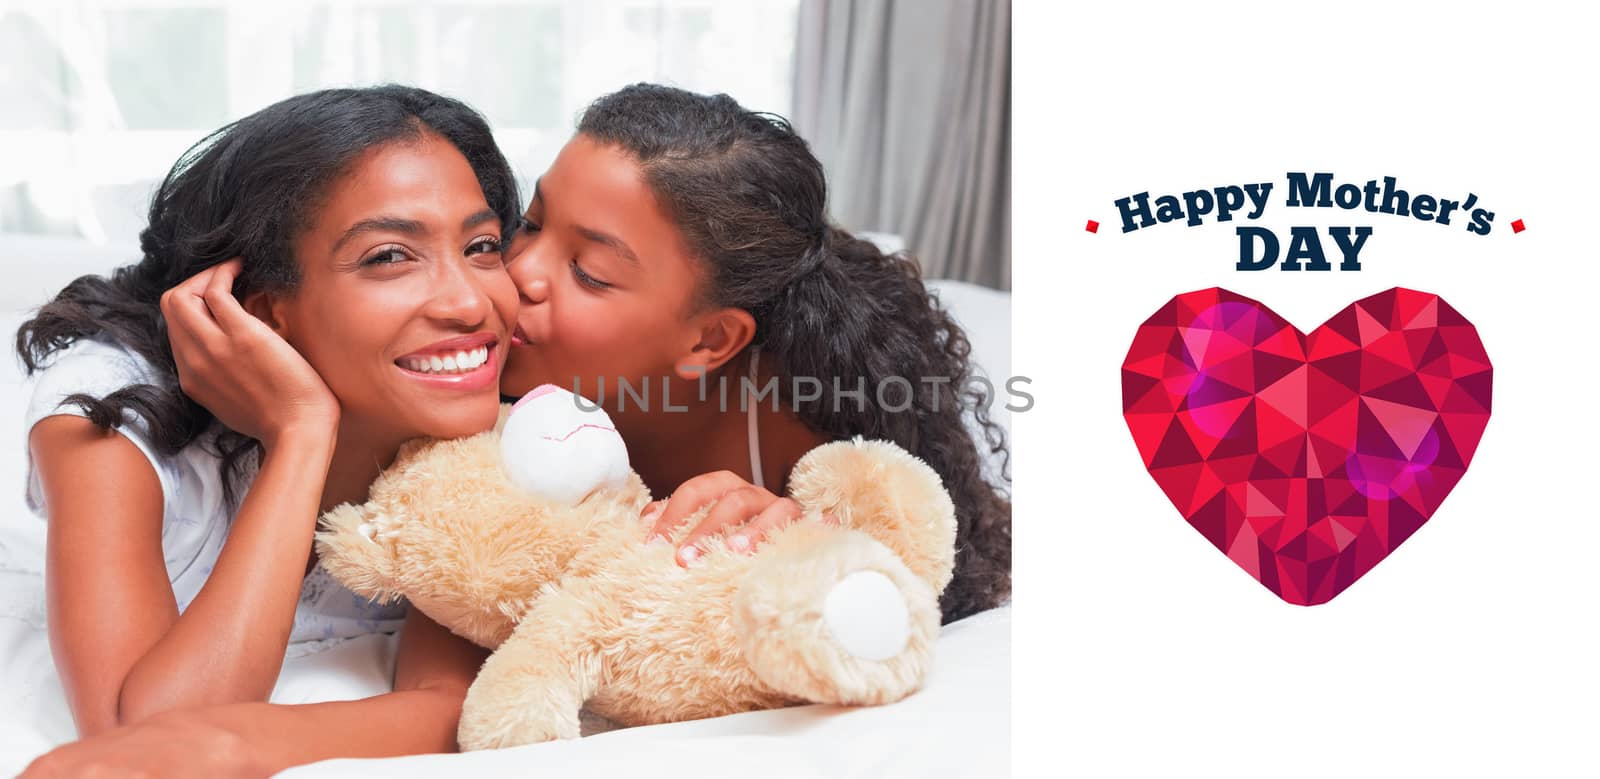 Pretty woman lying on bed with her daughter kissing cheek against happy mothers day